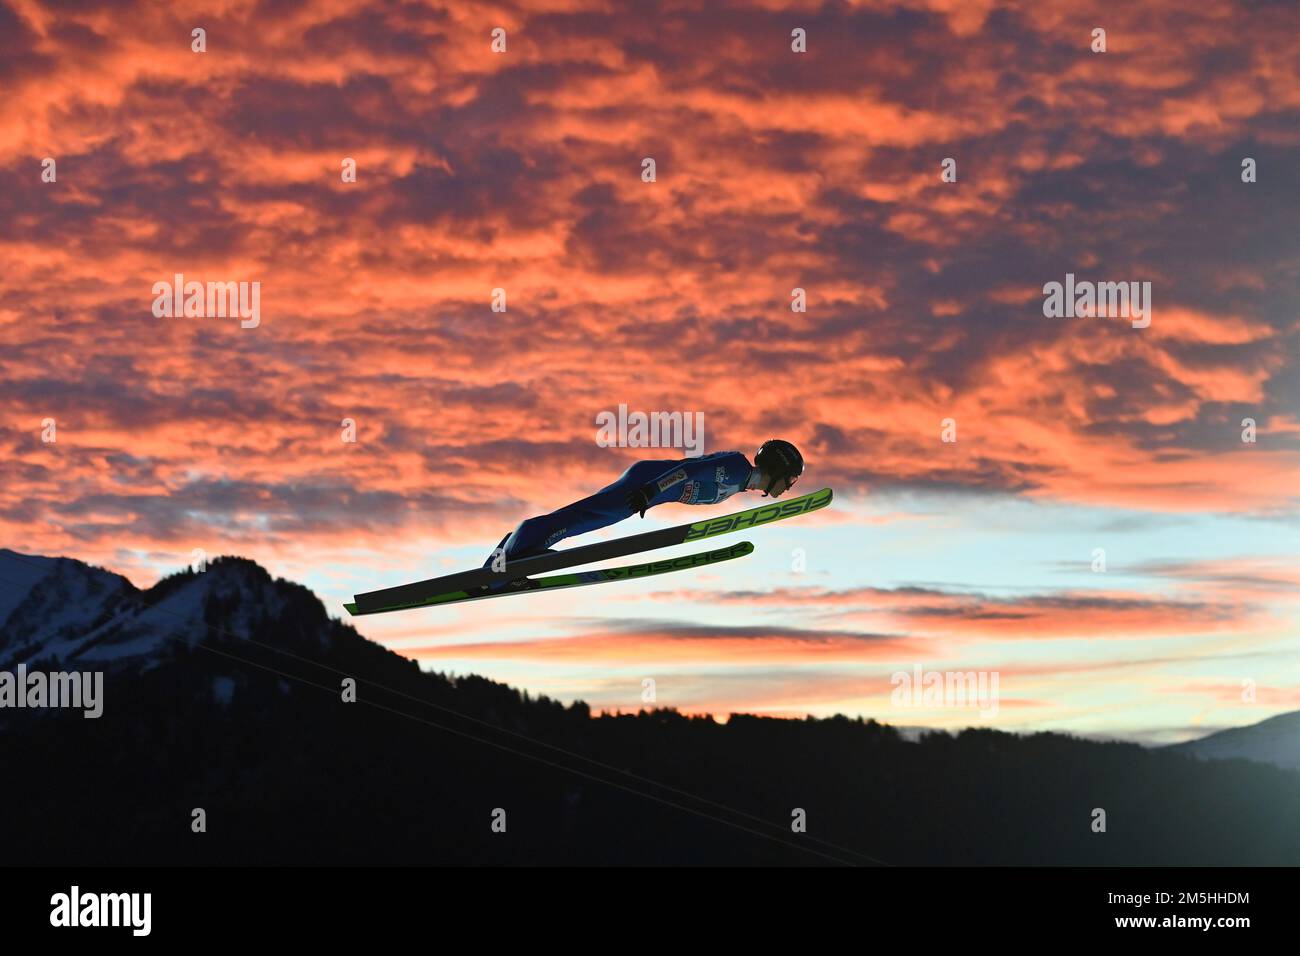 Oberstdorf, Deutschland. 28th Dec, 2022. General, edge motif, feature: jumper in front of the evening sky, silhouette, afterglow. Ski jumping jump, 71st International Four Hills Tournament 2022/23, opening jump in Oberstdorf, qualification on December 28th, 2022. AUDI ARENA. ? Credit: dpa/Alamy Live News Stock Photo